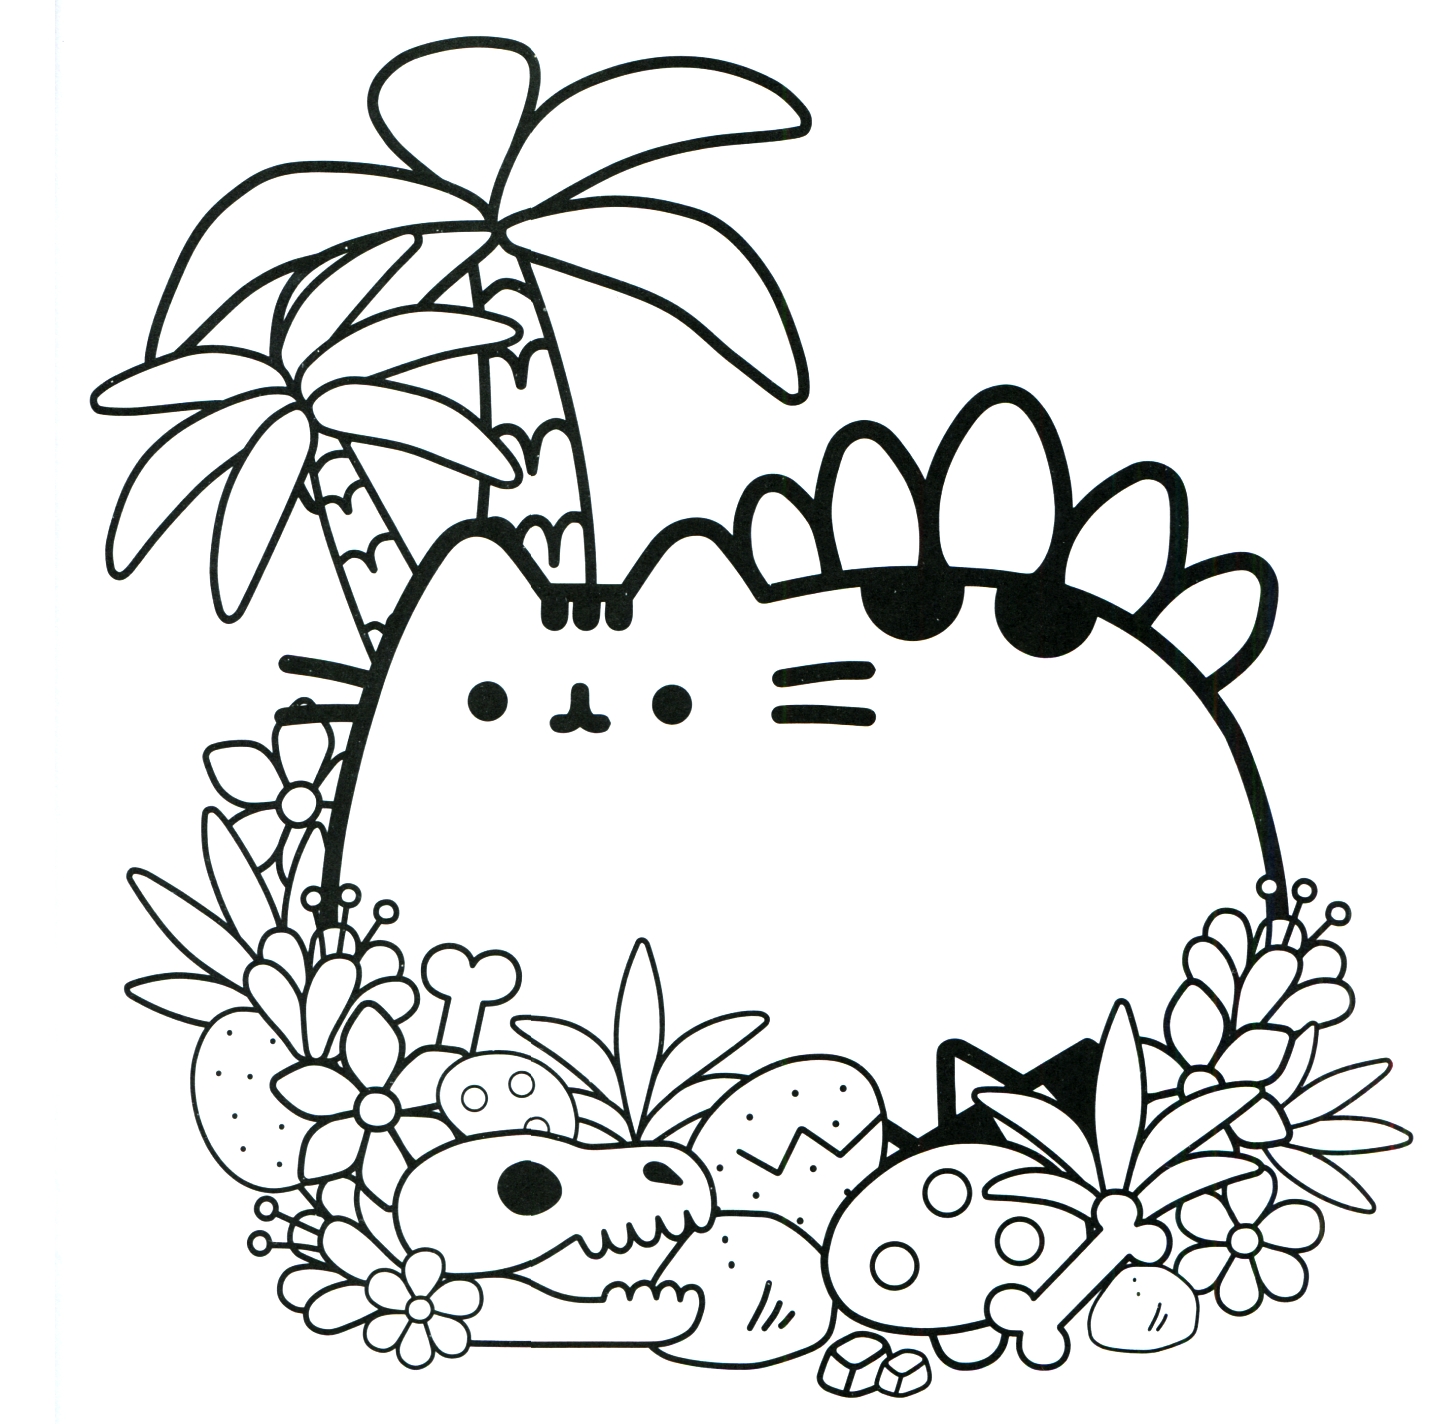 Pusheen Coloring Pages at GetColorings.com | Free printable colorings pages to print and color